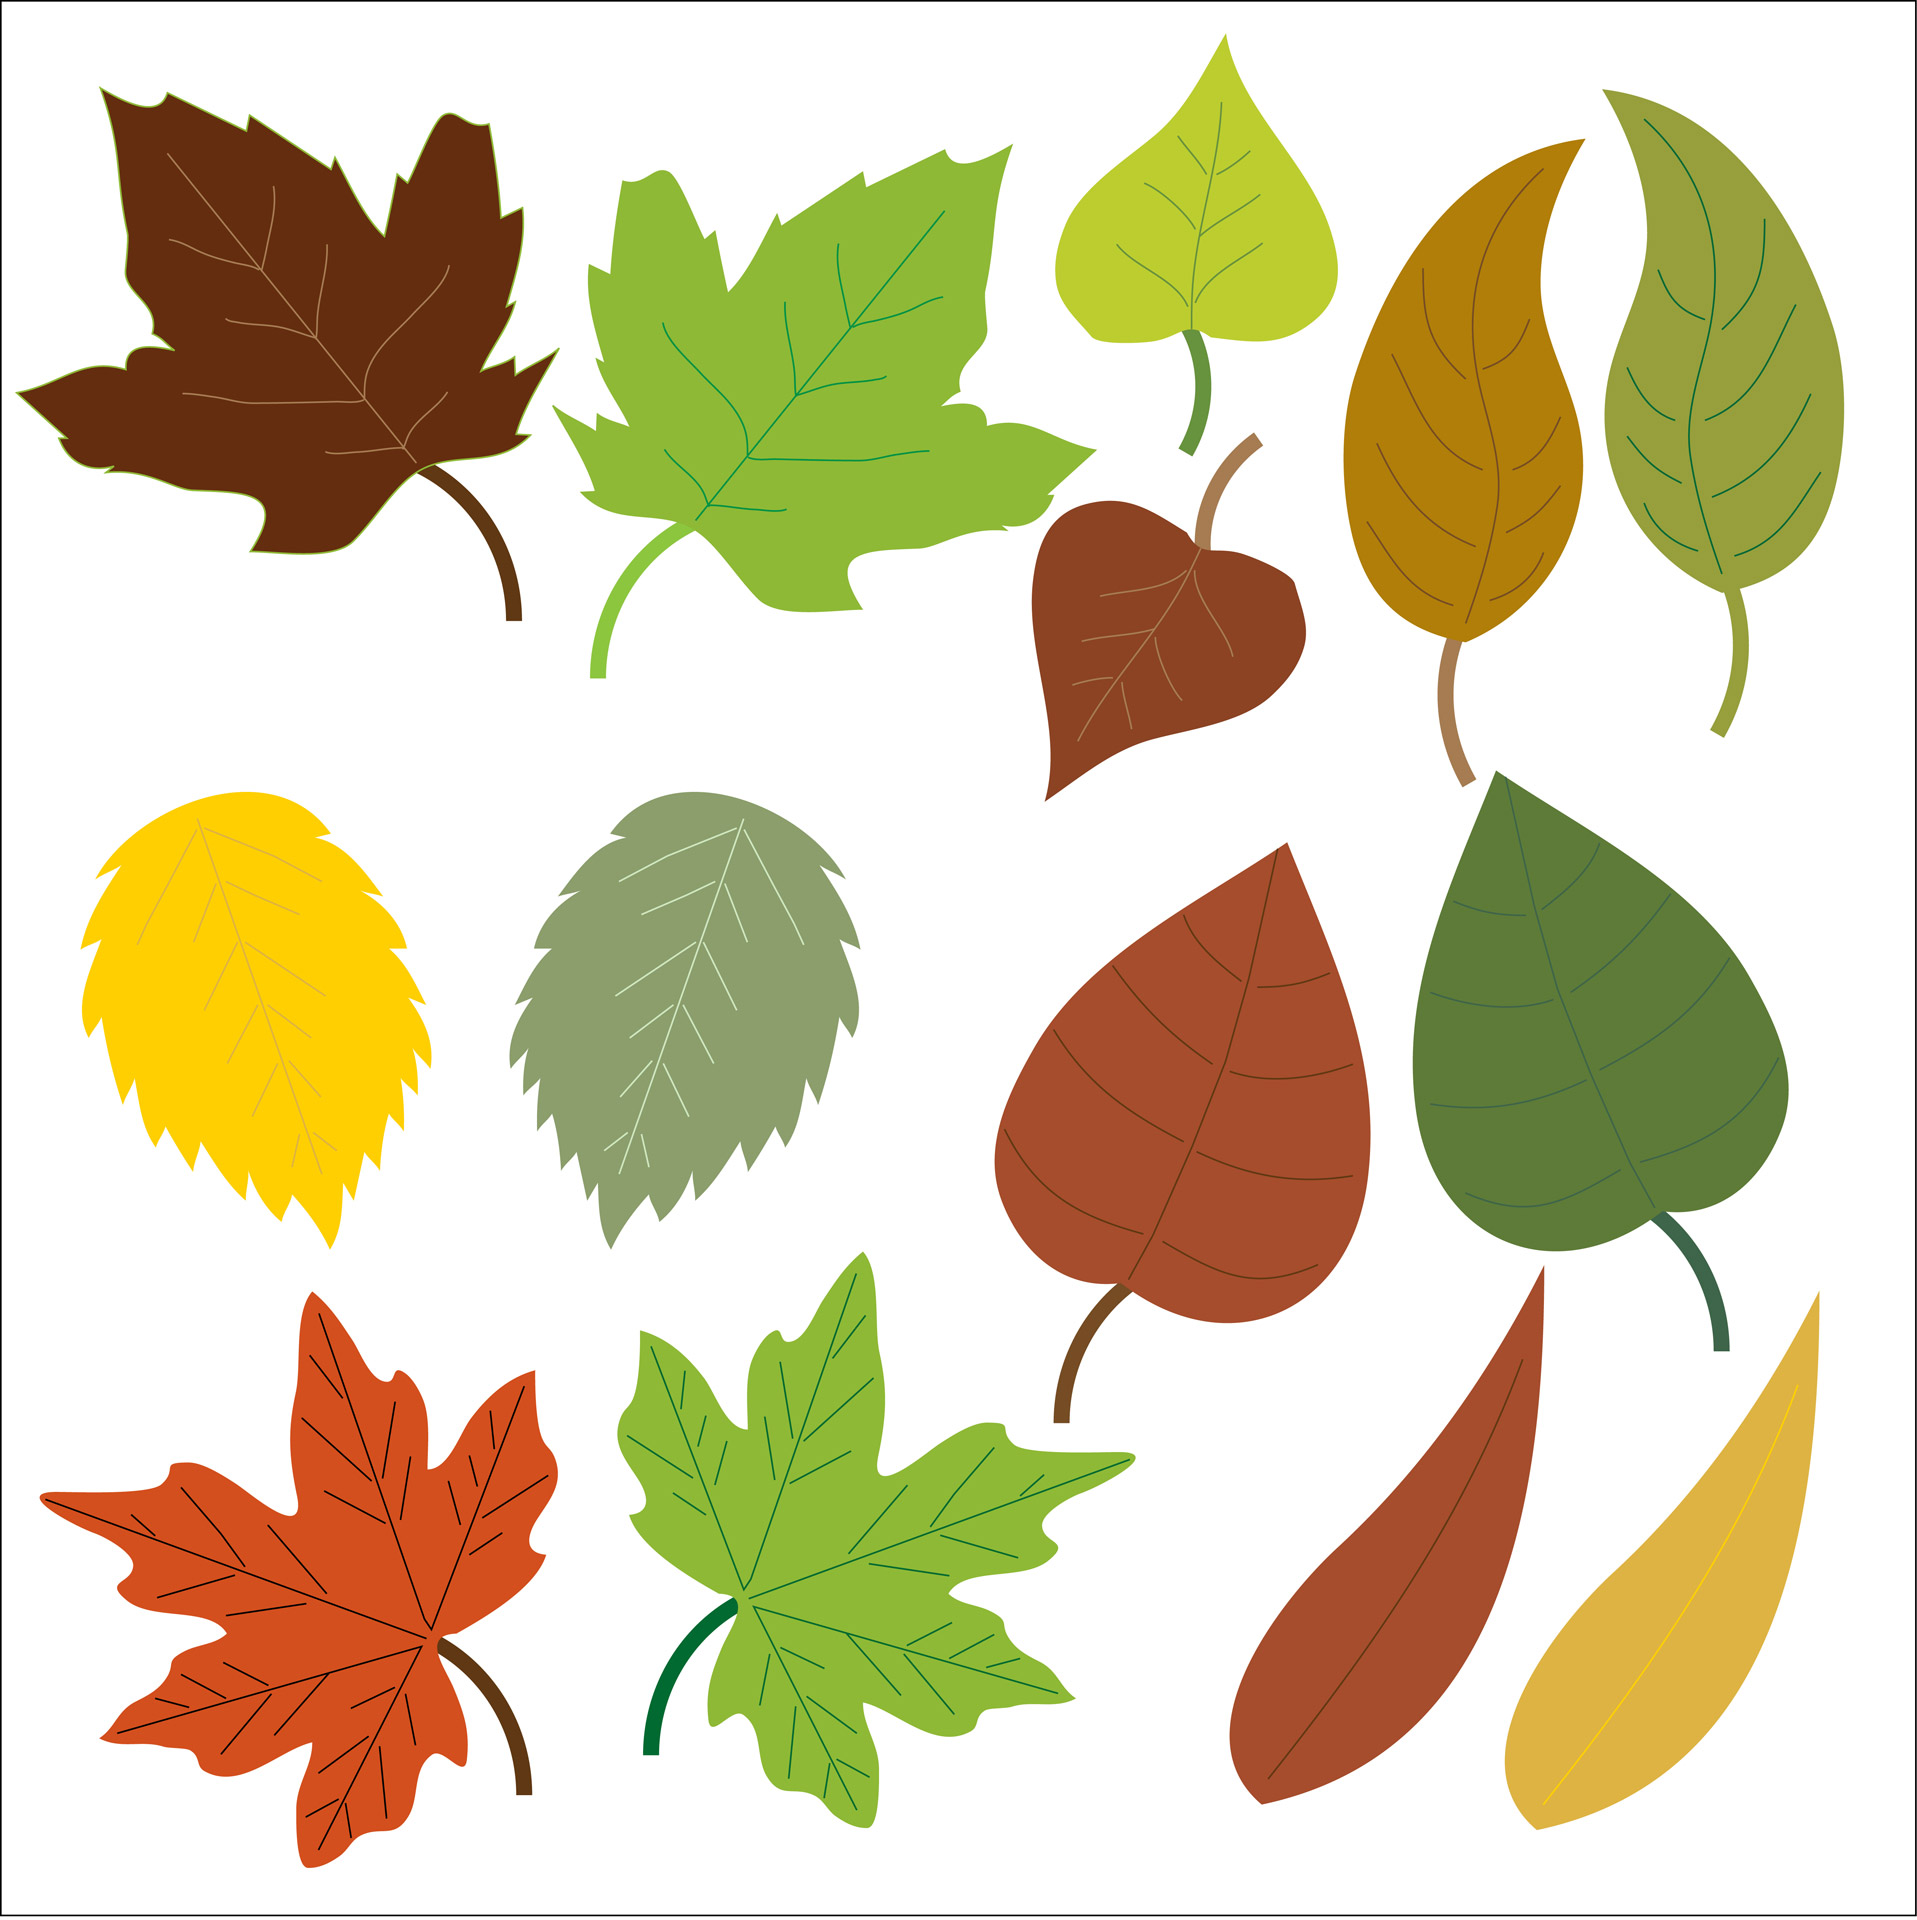 Leaves clipart icon, Picture #1526908 leaves clipart icon